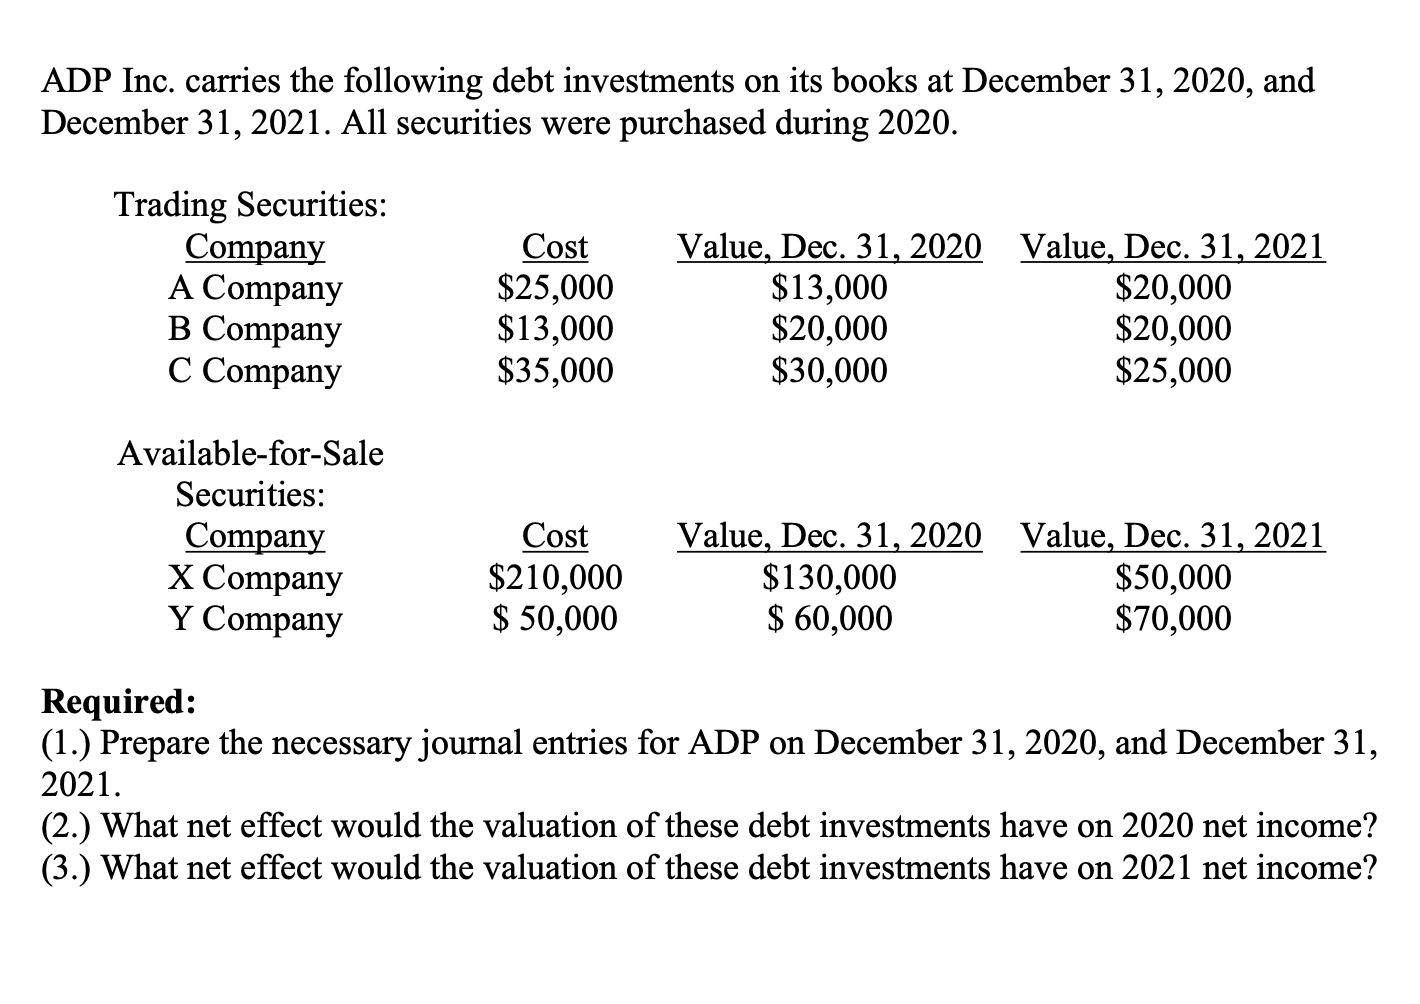 ADP Inc. carries the following debt investments on its books at December 31, 2020, and December 31, 2021. All